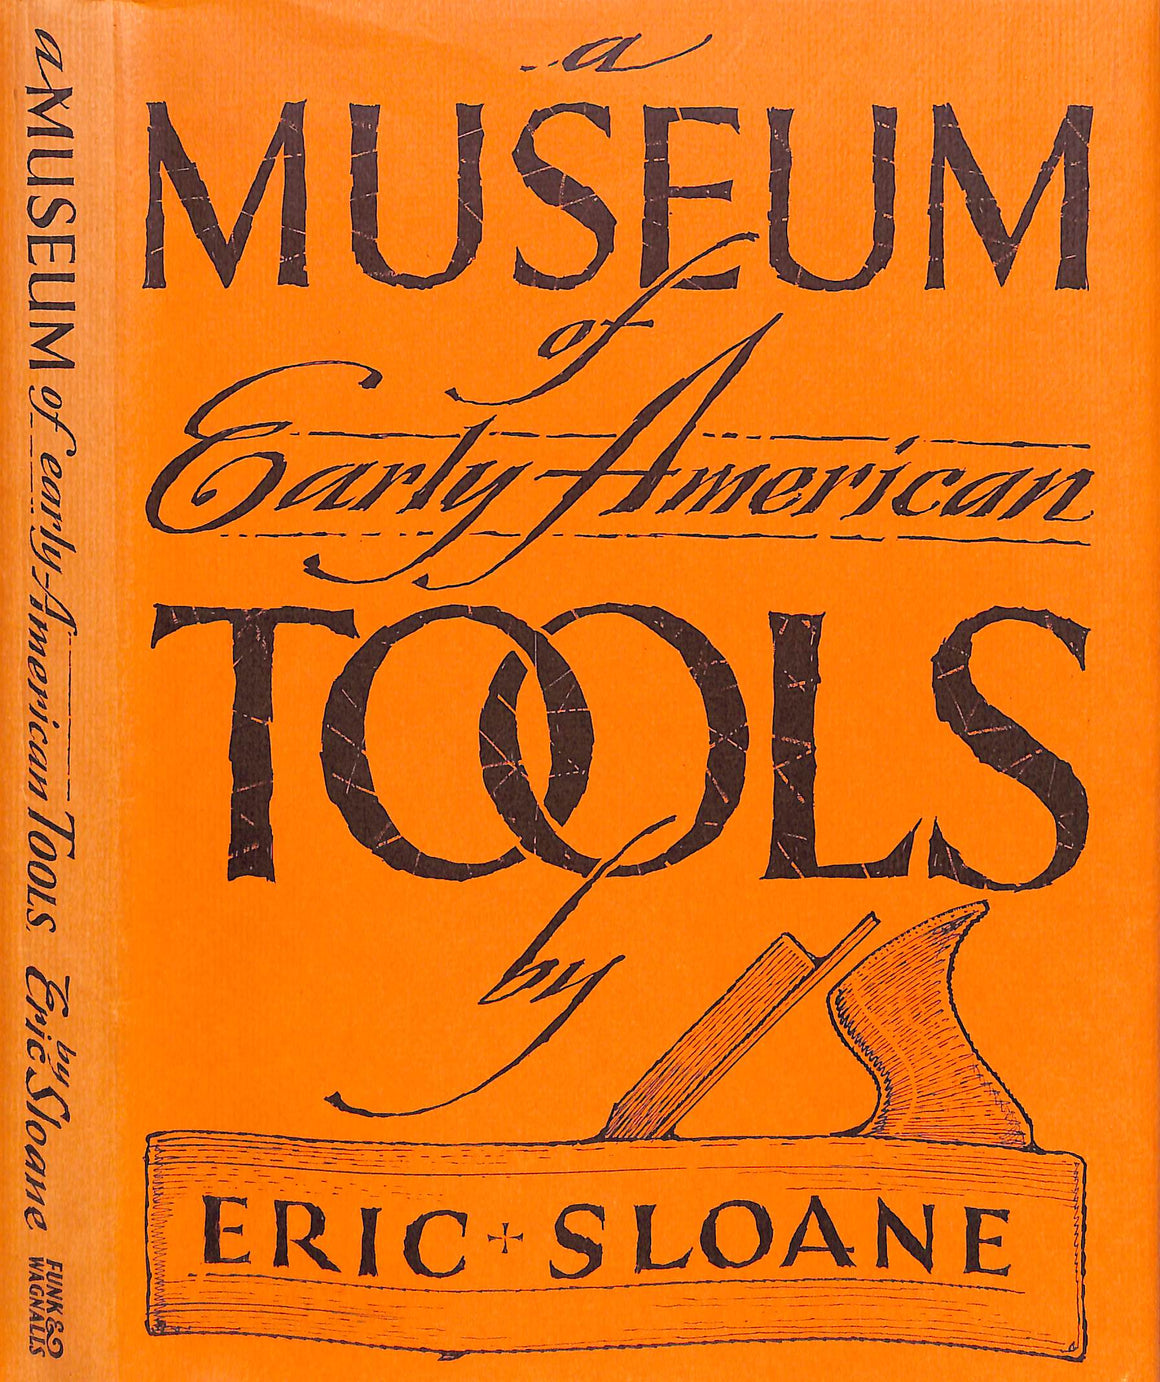 "A Museum Of Early American Tools" 1964 SLOANE, Eric